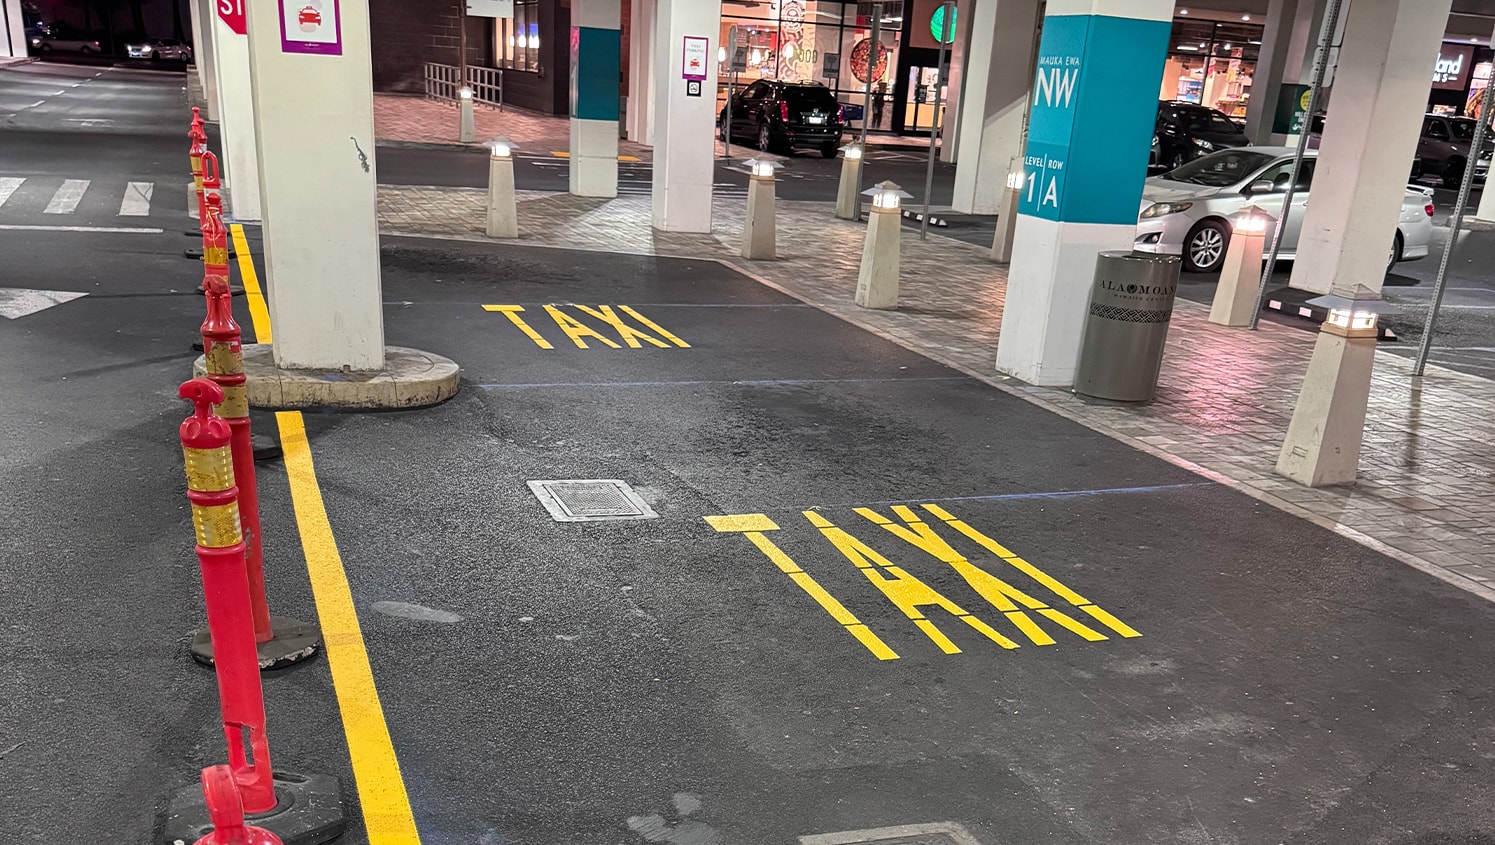 new taxi layout for Ala Moana Shopping Center parking lot